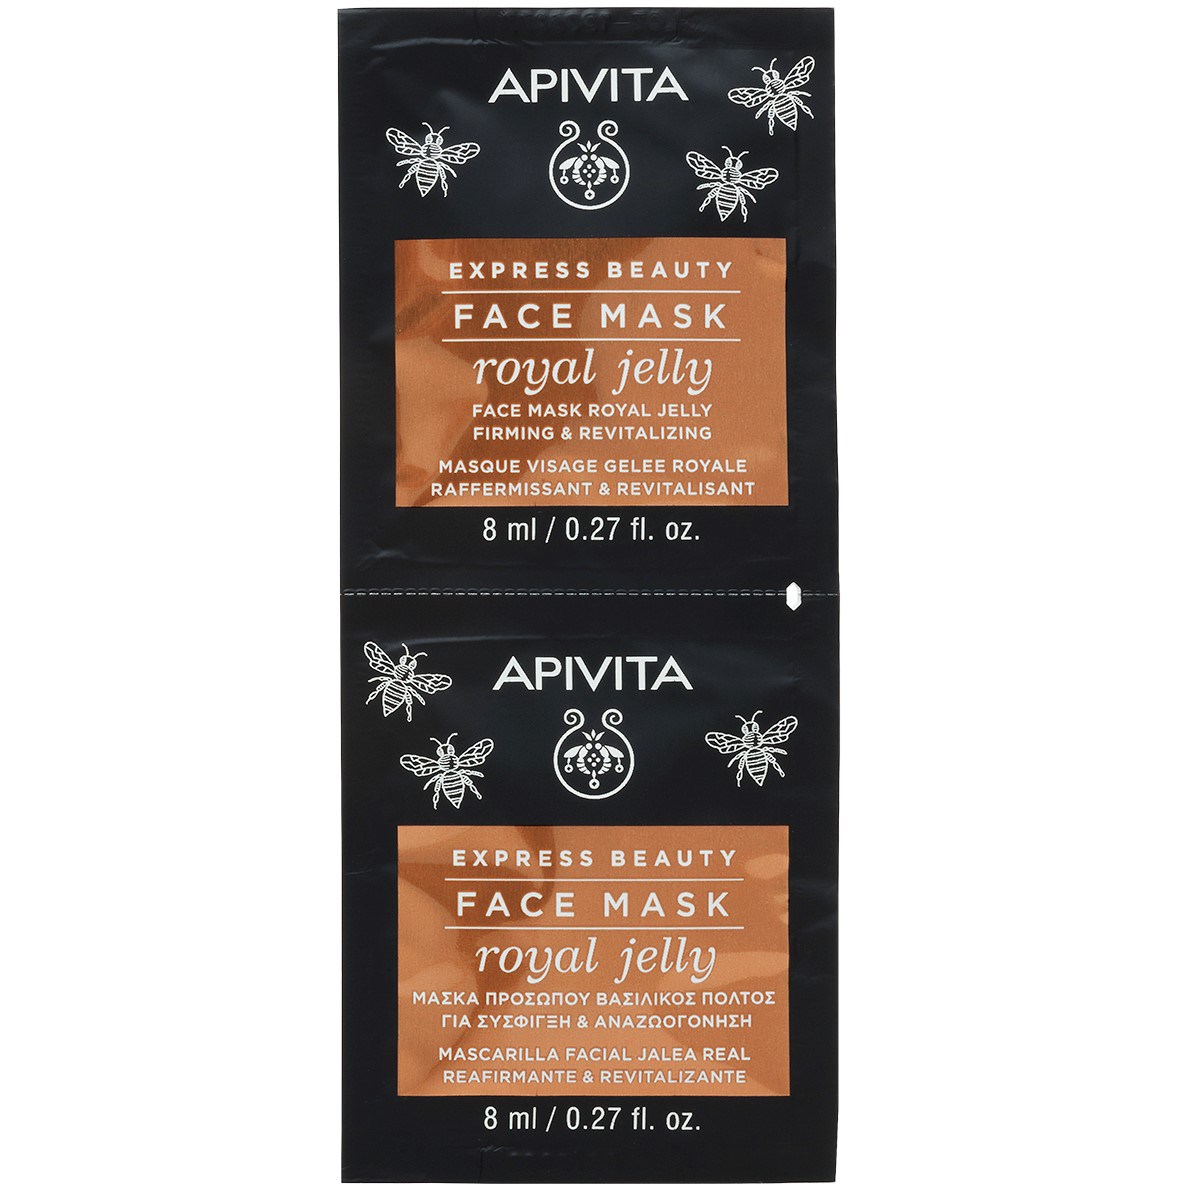 APIVITA Express Beauty Firming & Revitalizing Face Mask with Royal jel